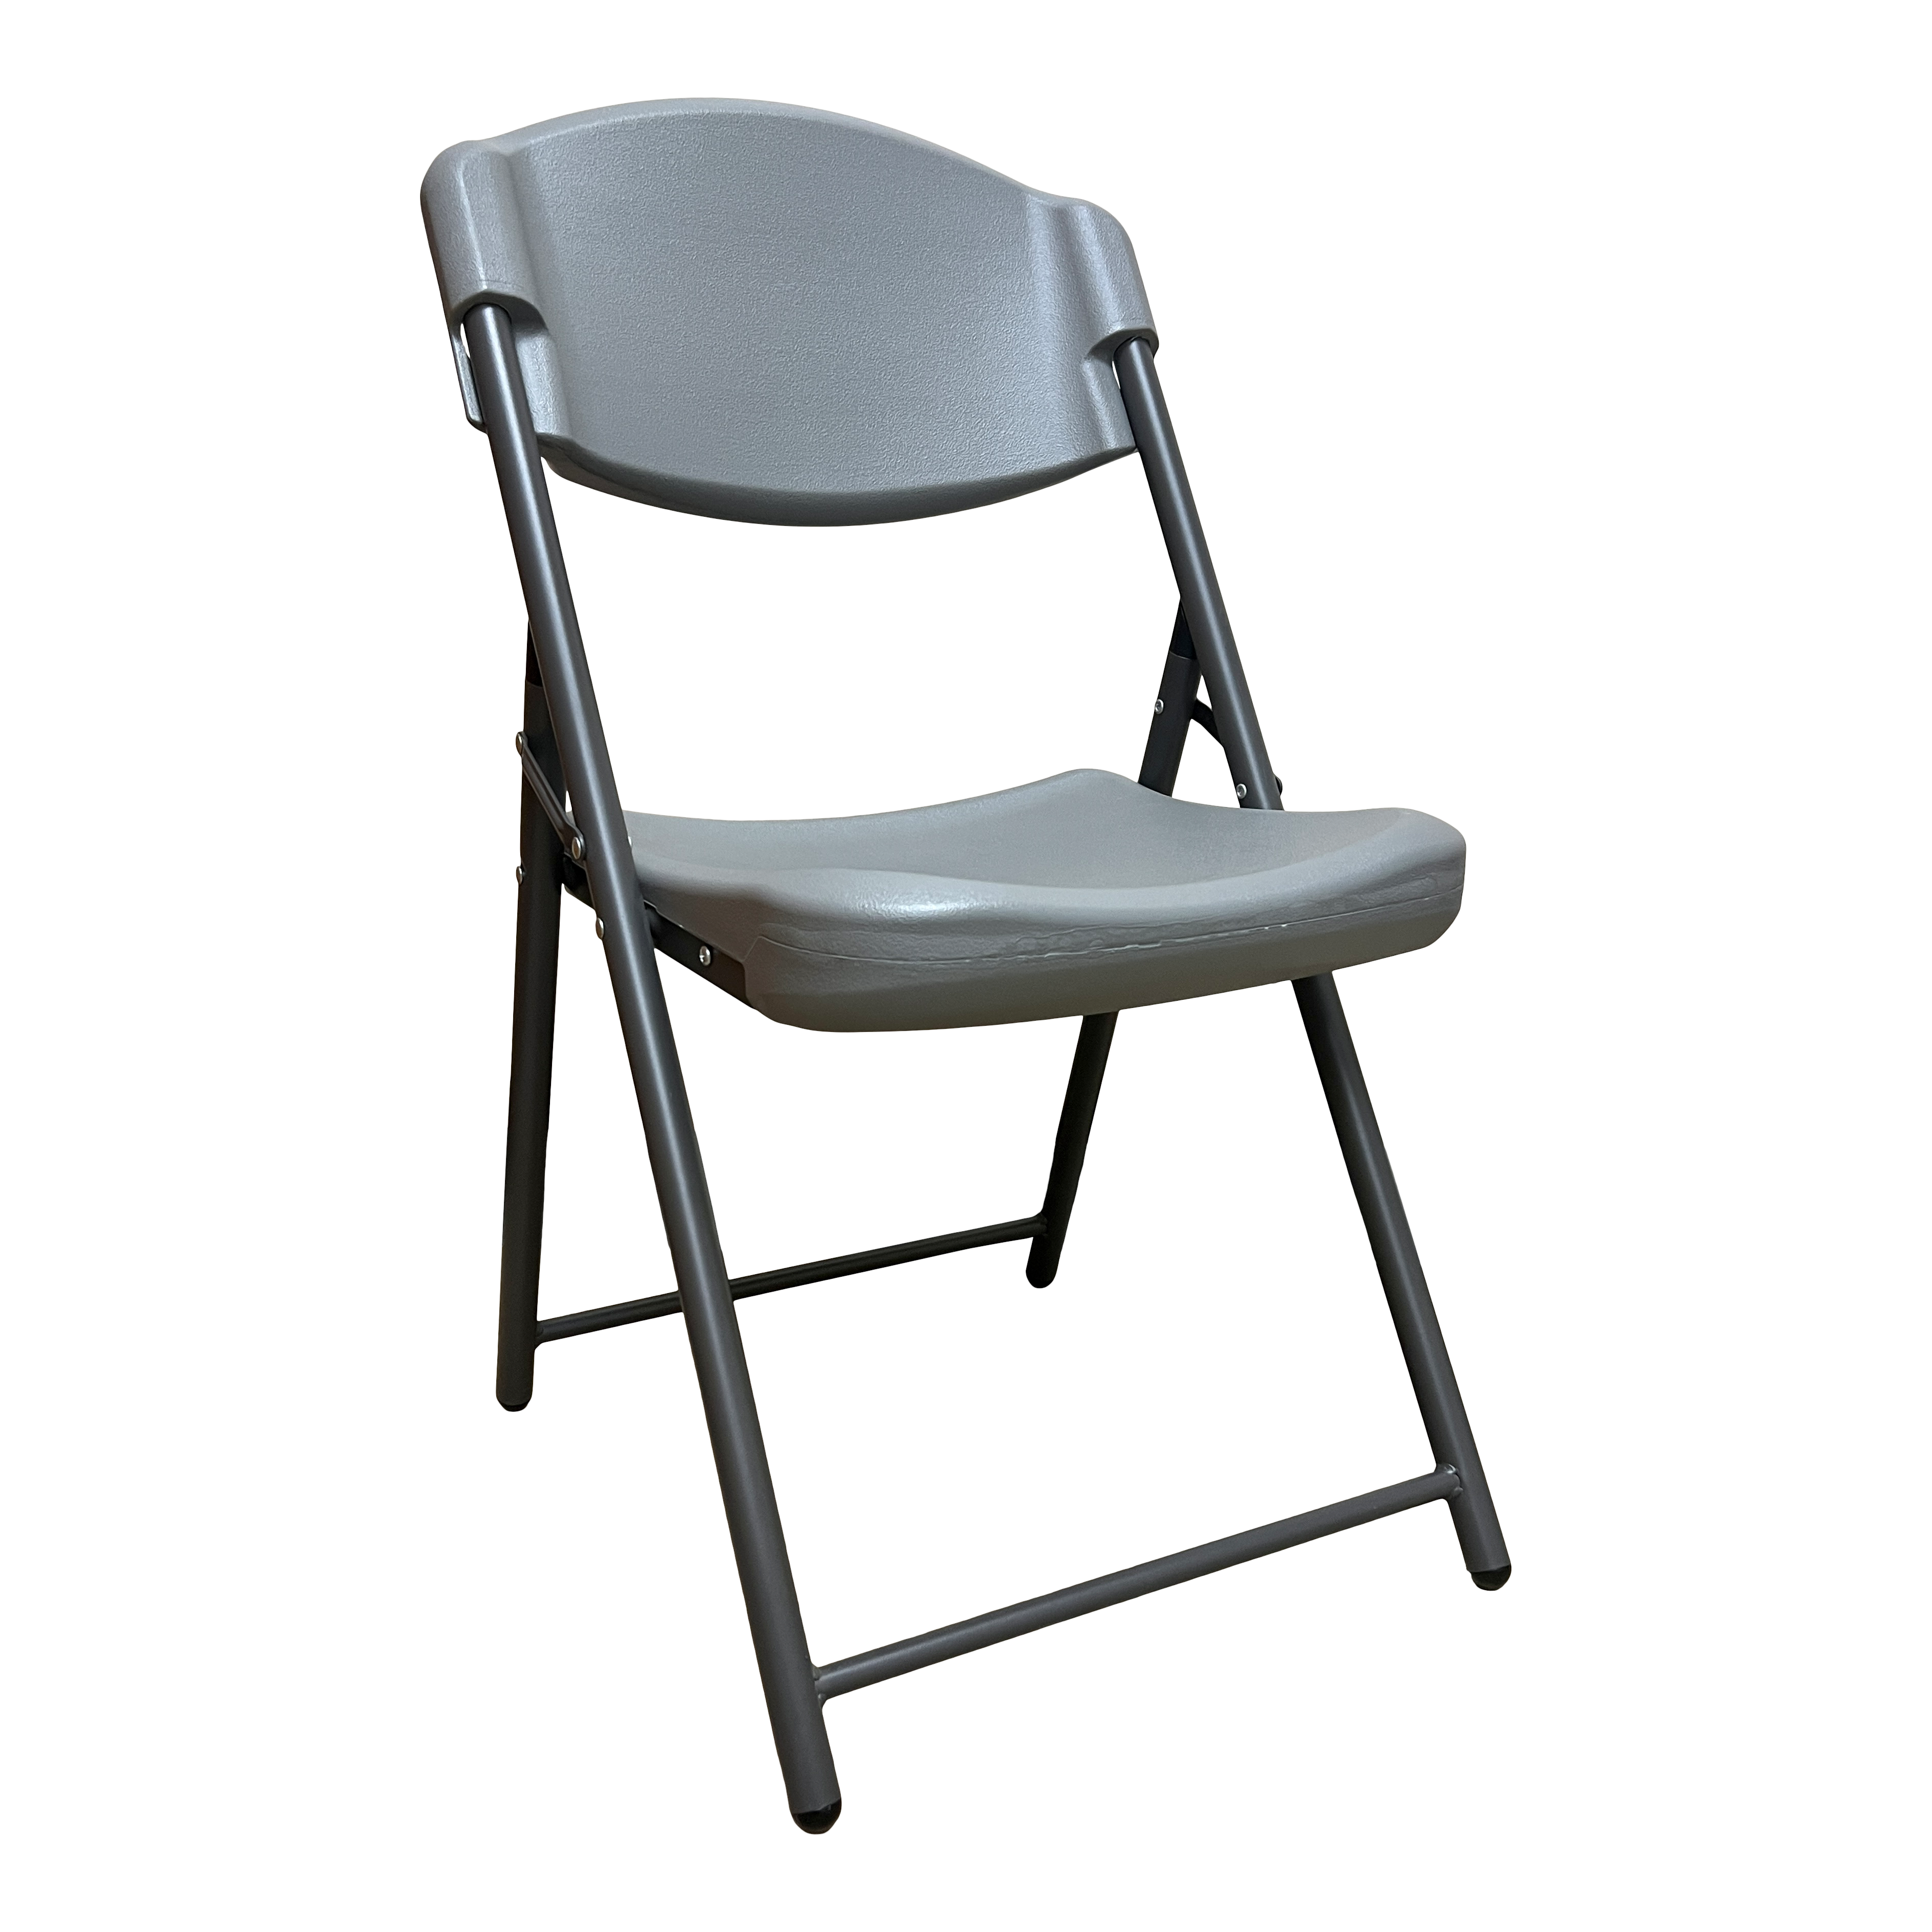 A charcoal folding chair. 